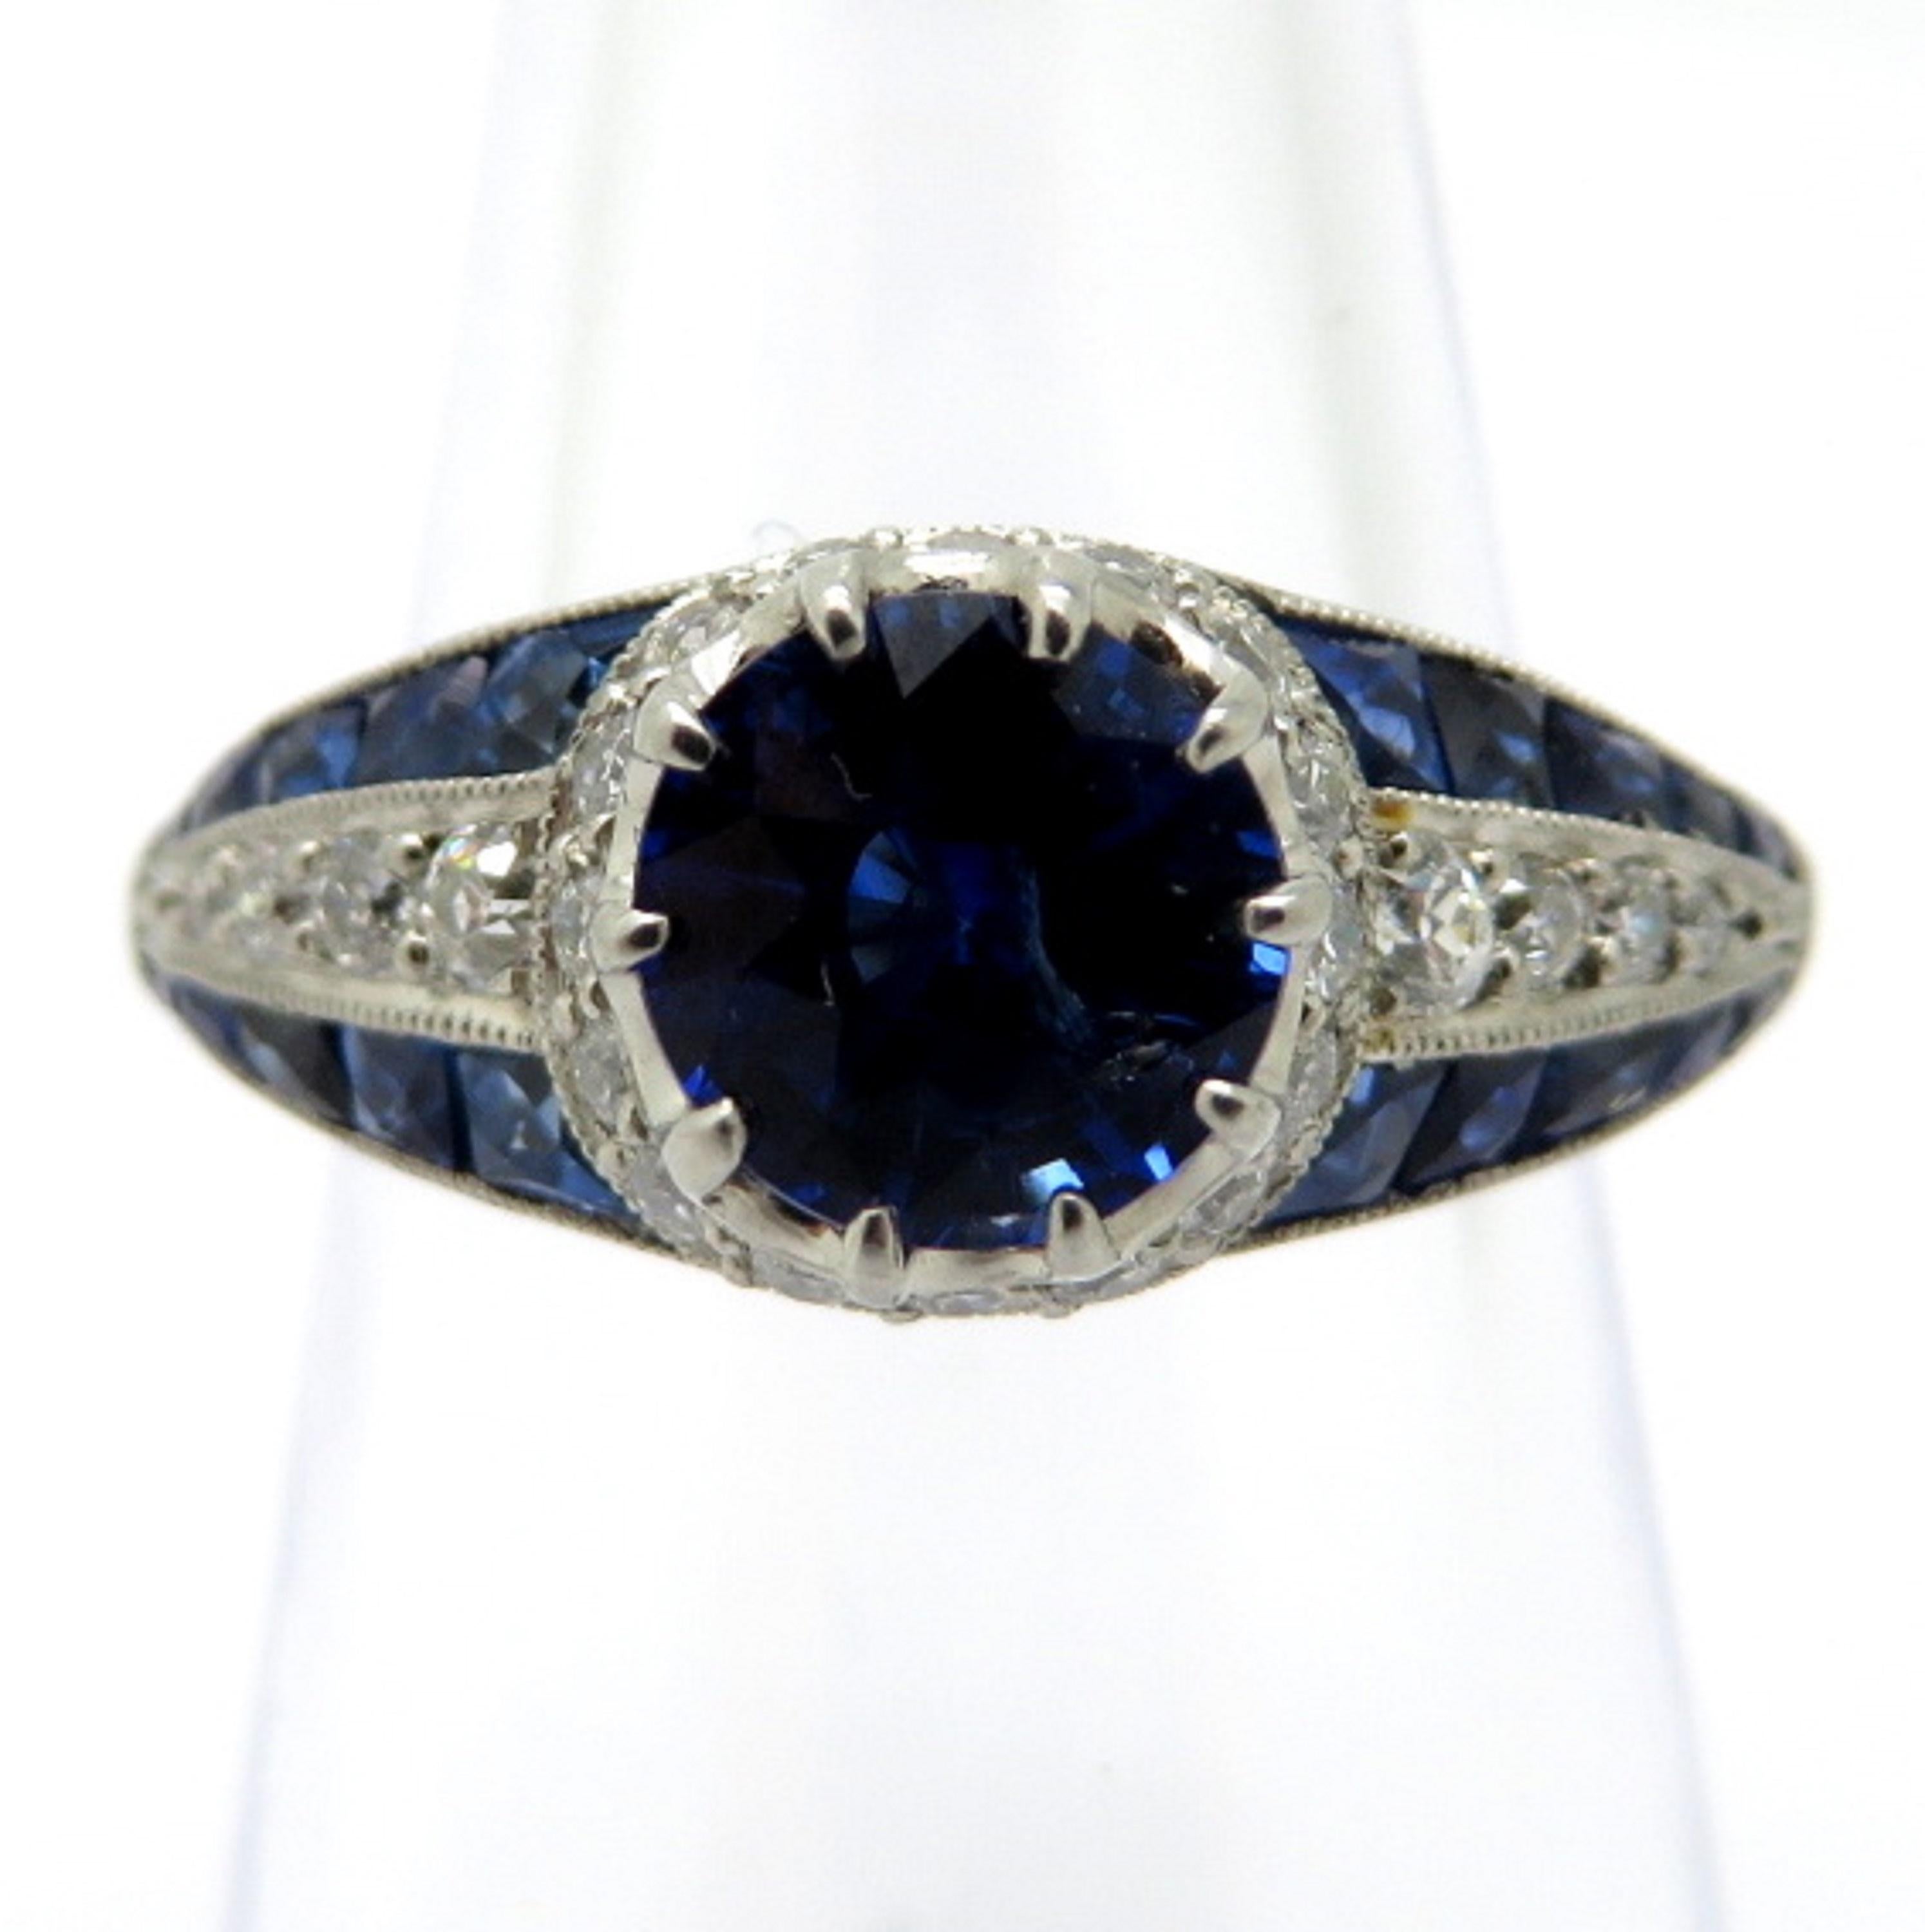 For sale is a stunning estate Platinum Diamond and Sapphire Art Deco ring!
Showcasing one (1) Round Brilliant Cut natural fine quality blue sapphire, measuring 6.61-6.64 mm, weighing approximately 1.34 carats.  
Accenting the sapphire are forty-two